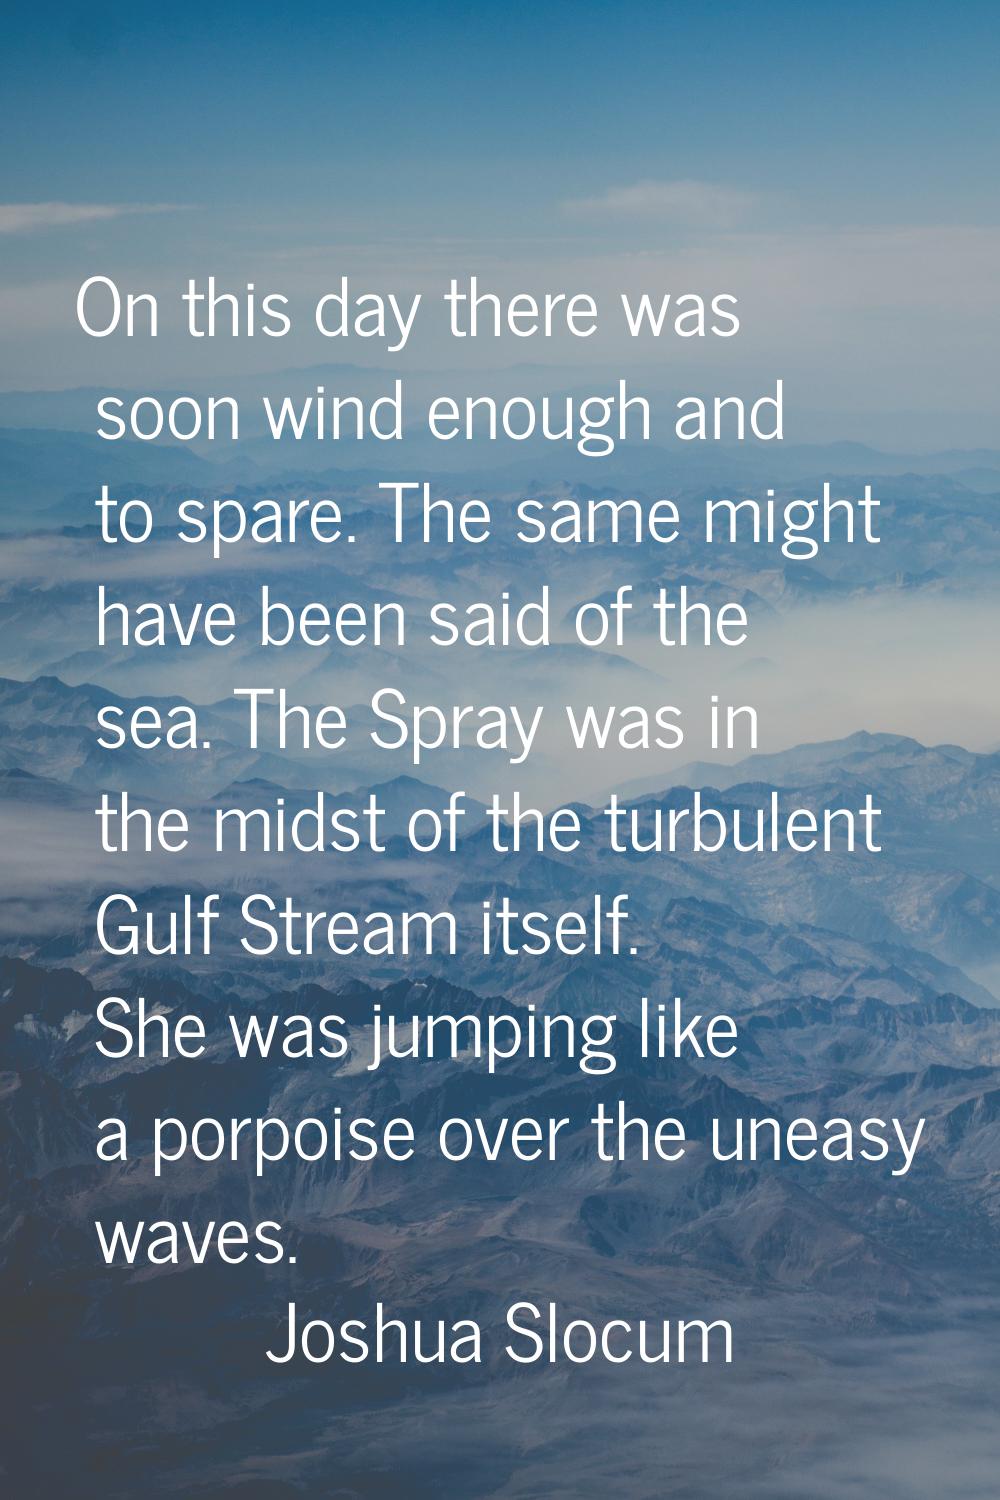 On this day there was soon wind enough and to spare. The same might have been said of the sea. The 